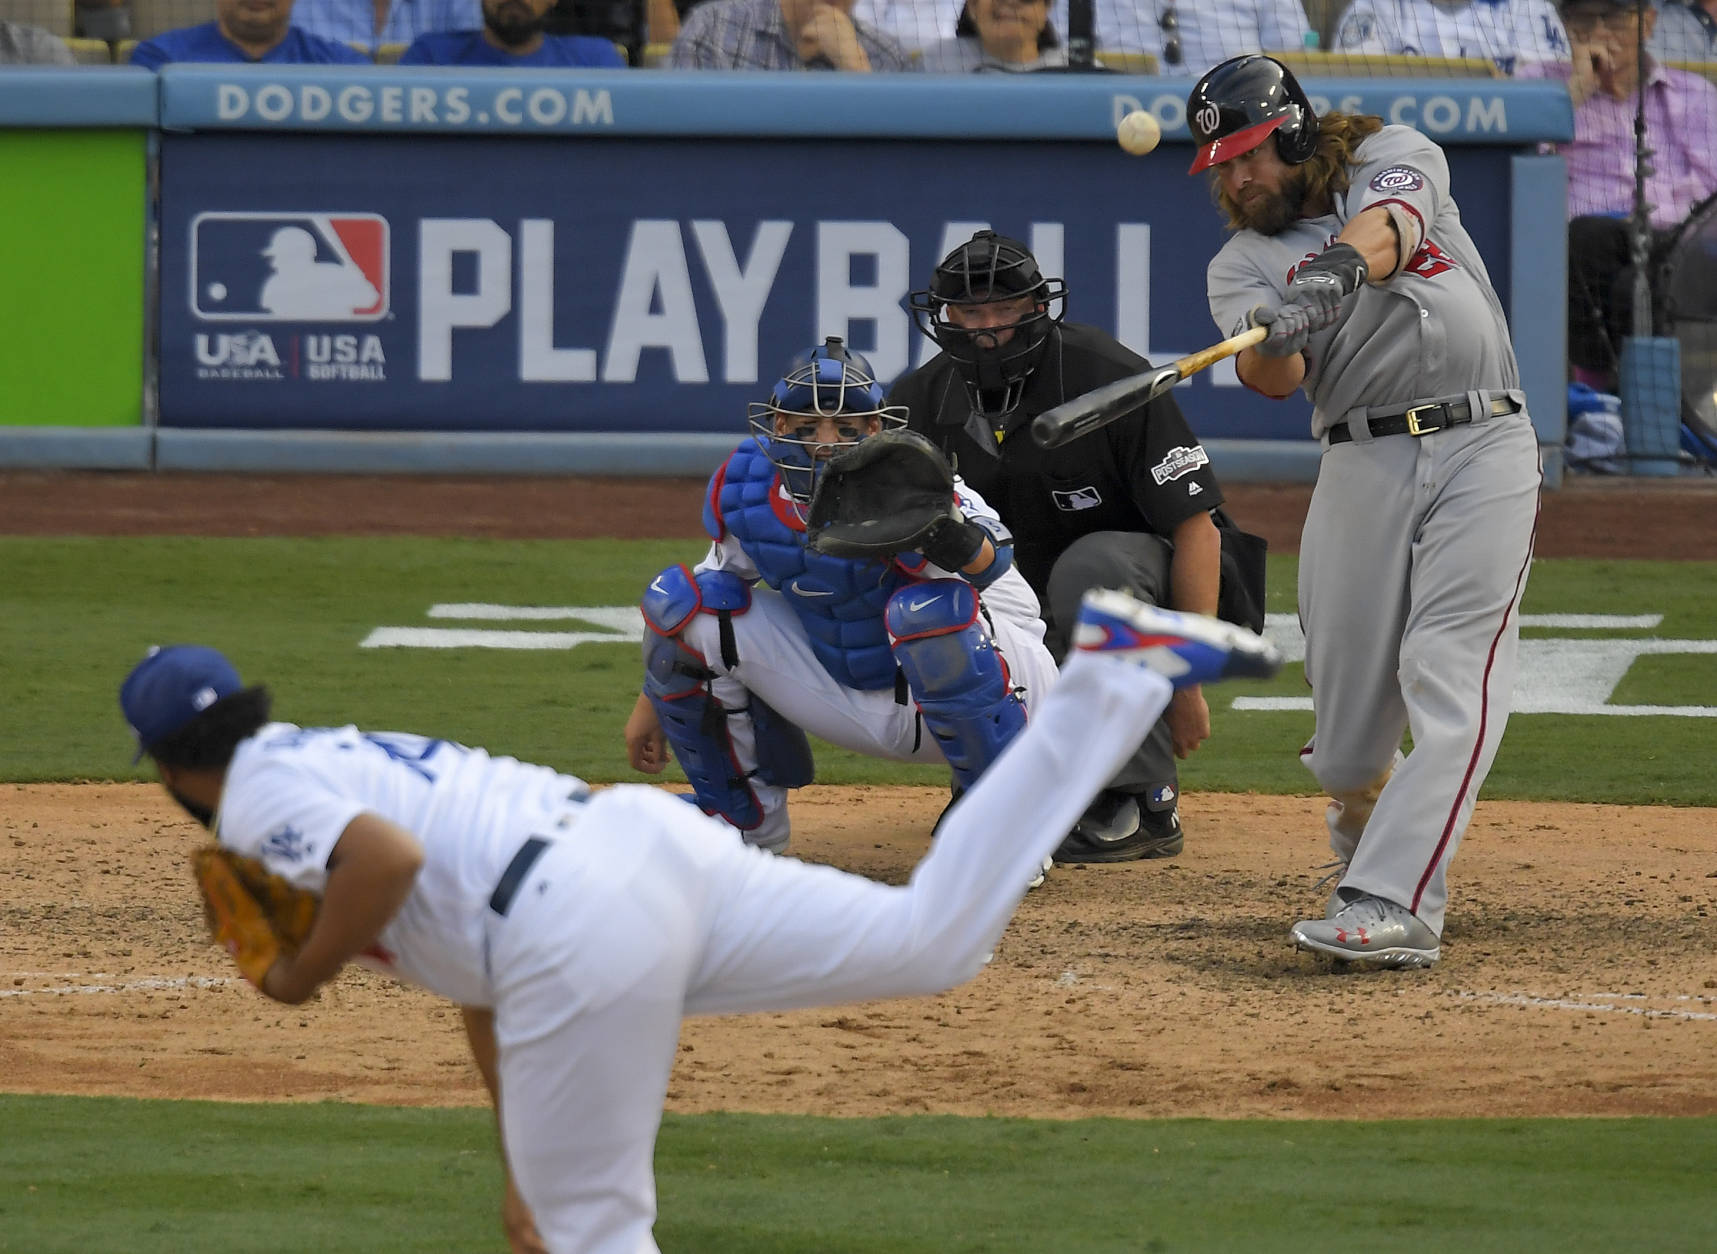 Washington Nationals' Jayson Werth hits a solo home run during the ninth inning in Game 3 of baseball's National League Division Series against the Los Angeles Dodgers, Monday, Oct. 10, 2016, in Los Angeles. (AP Photo/Mark J. Terrill)